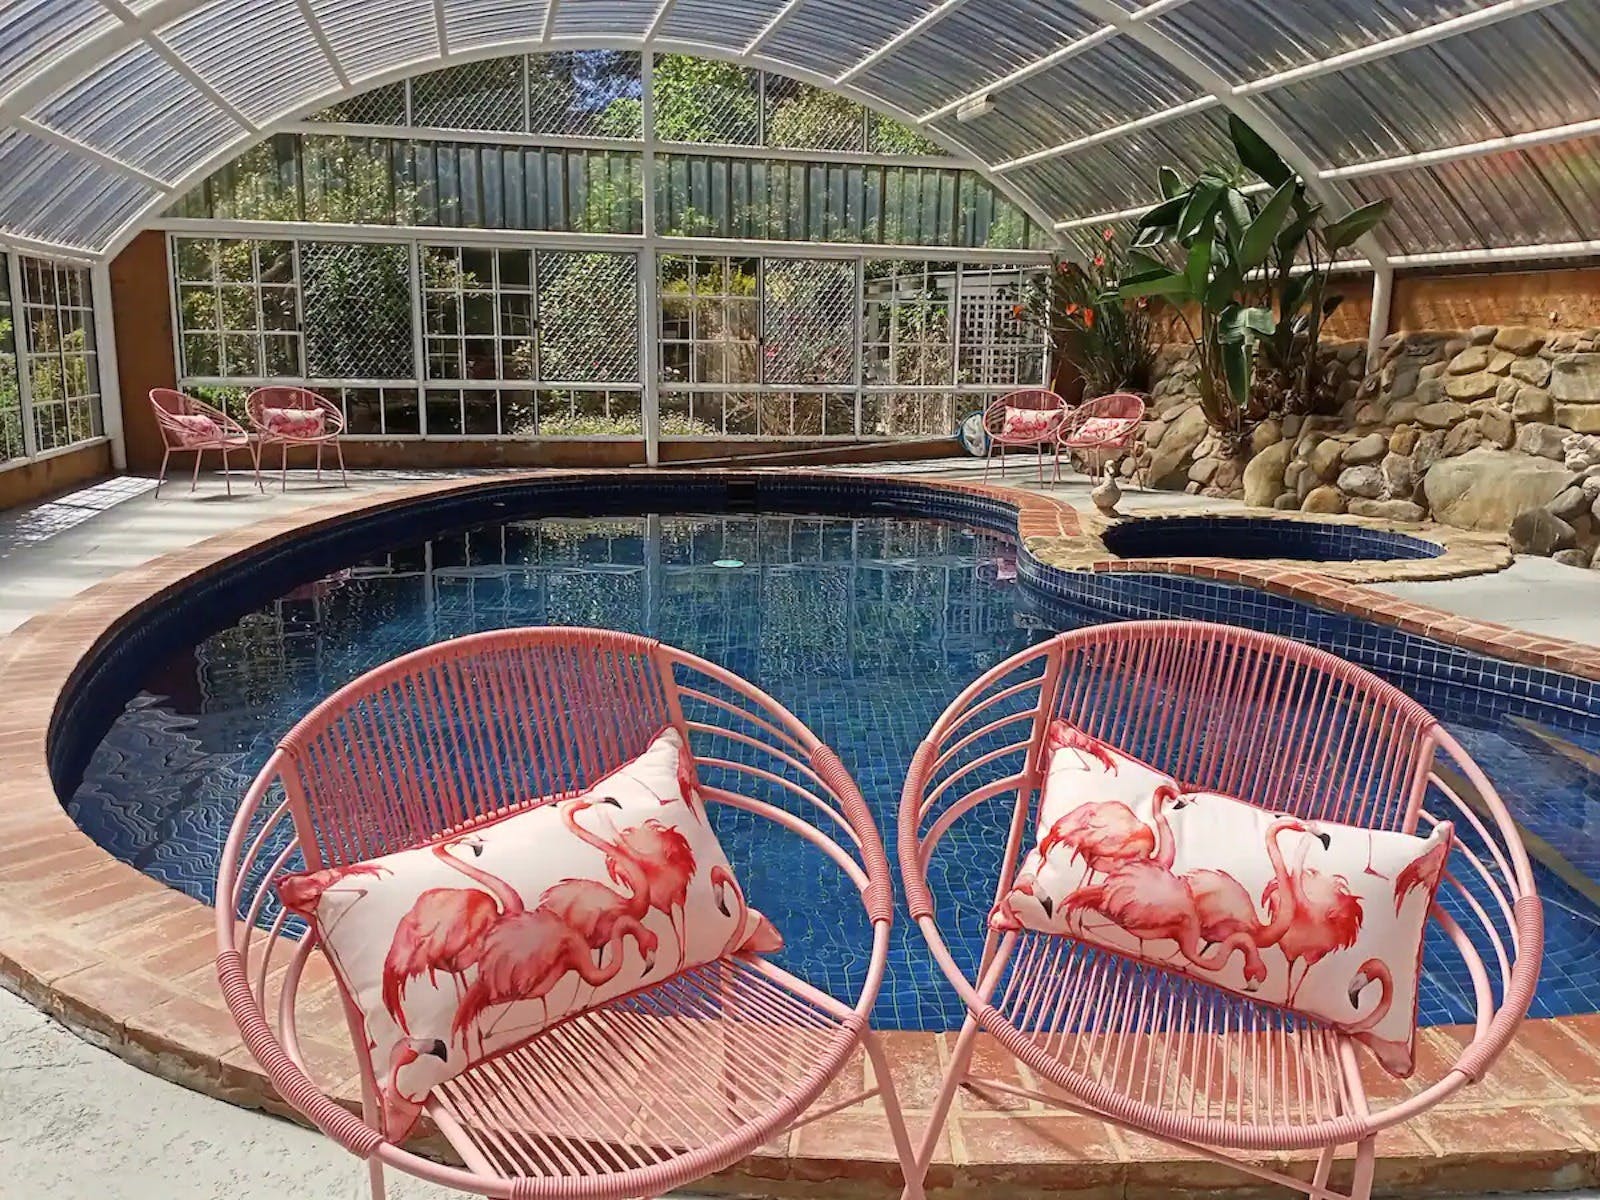 Two pink chairs sit in front of a blue pool under a clear domed roof.